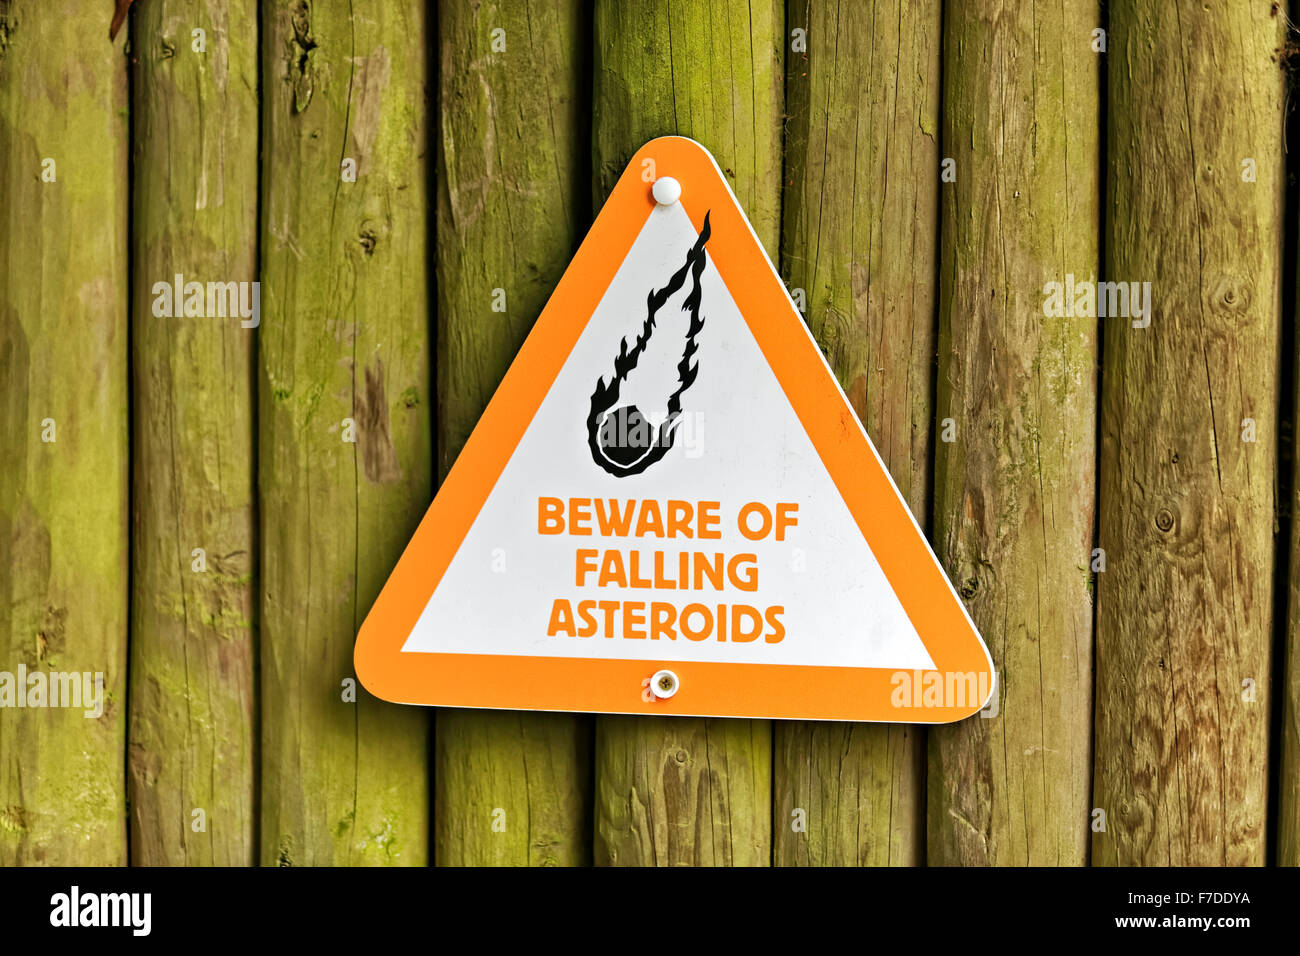 Asteroids Stock Photos & Asteroids Stock Images - Alamy